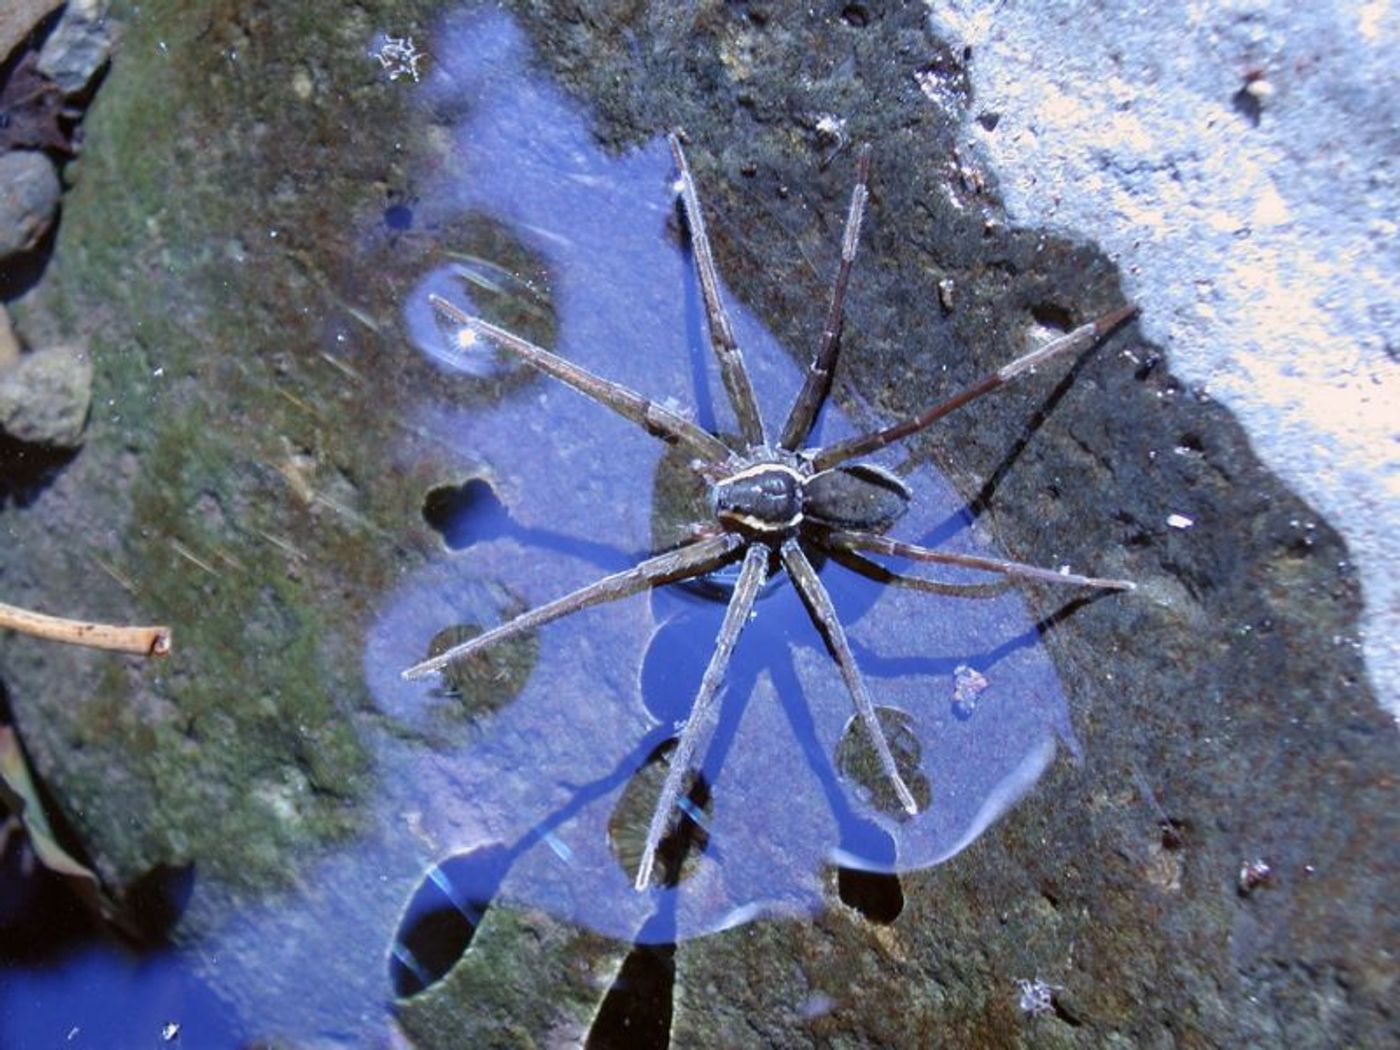 Newly-discovered spider species devours fish more than 3x its size.